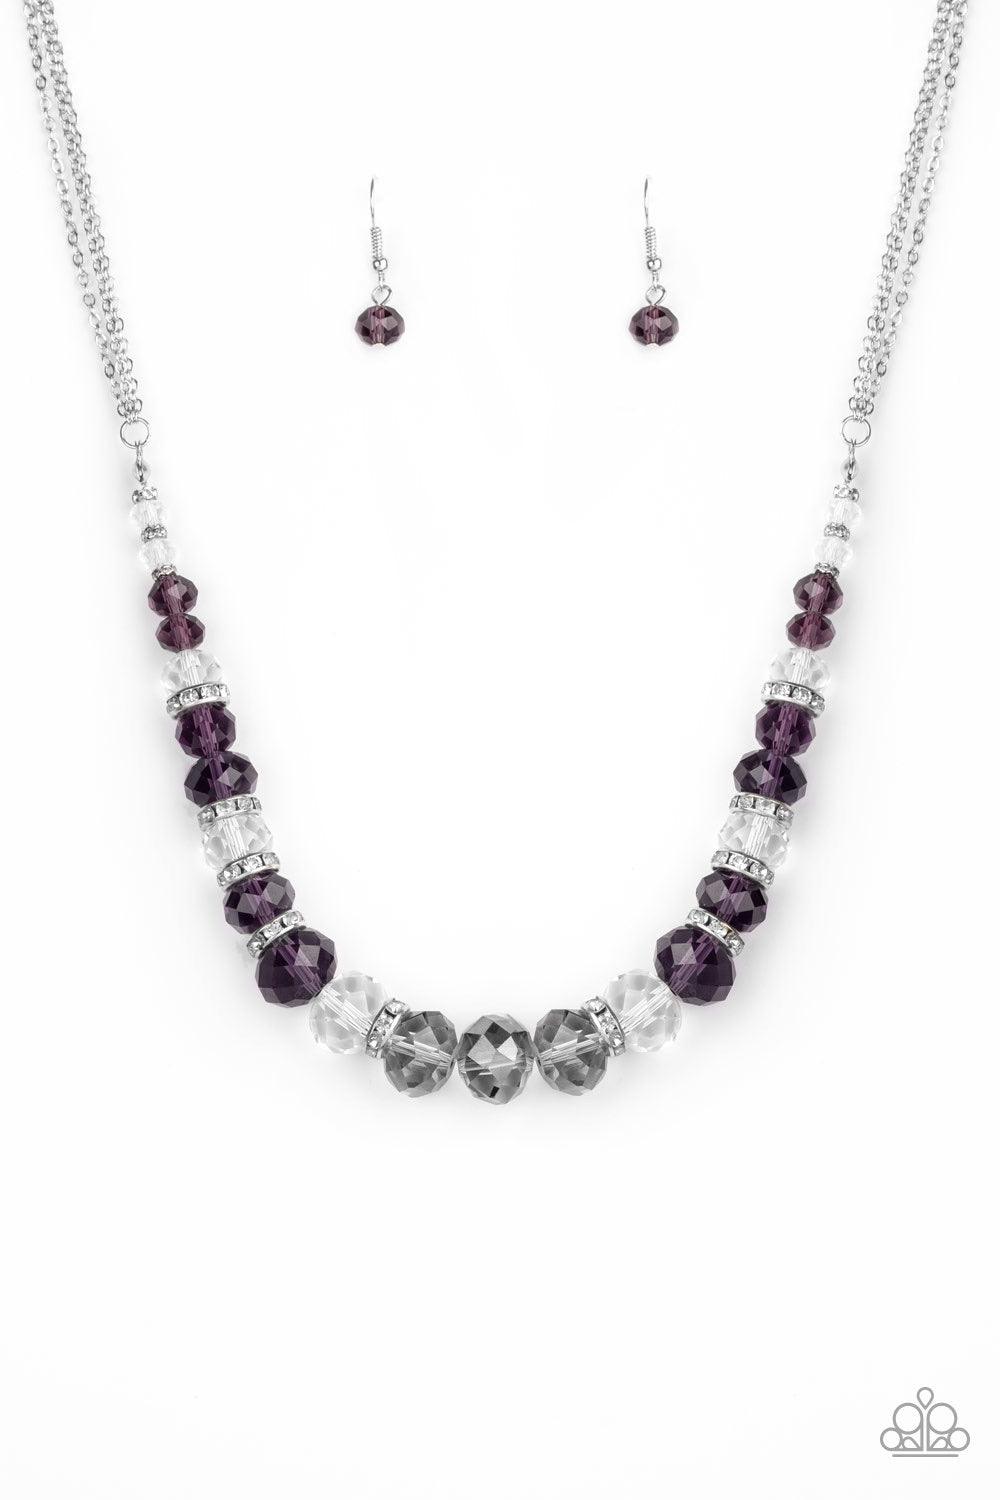 Paparazzi Accessories Distracted by Dazzle - Purple Attached to strands of shimmery silver chains, a glittery collection of purple, smoky, and white crystal-like gems and white rhinestone encrusted silver rings are threaded along an invisible wire below t